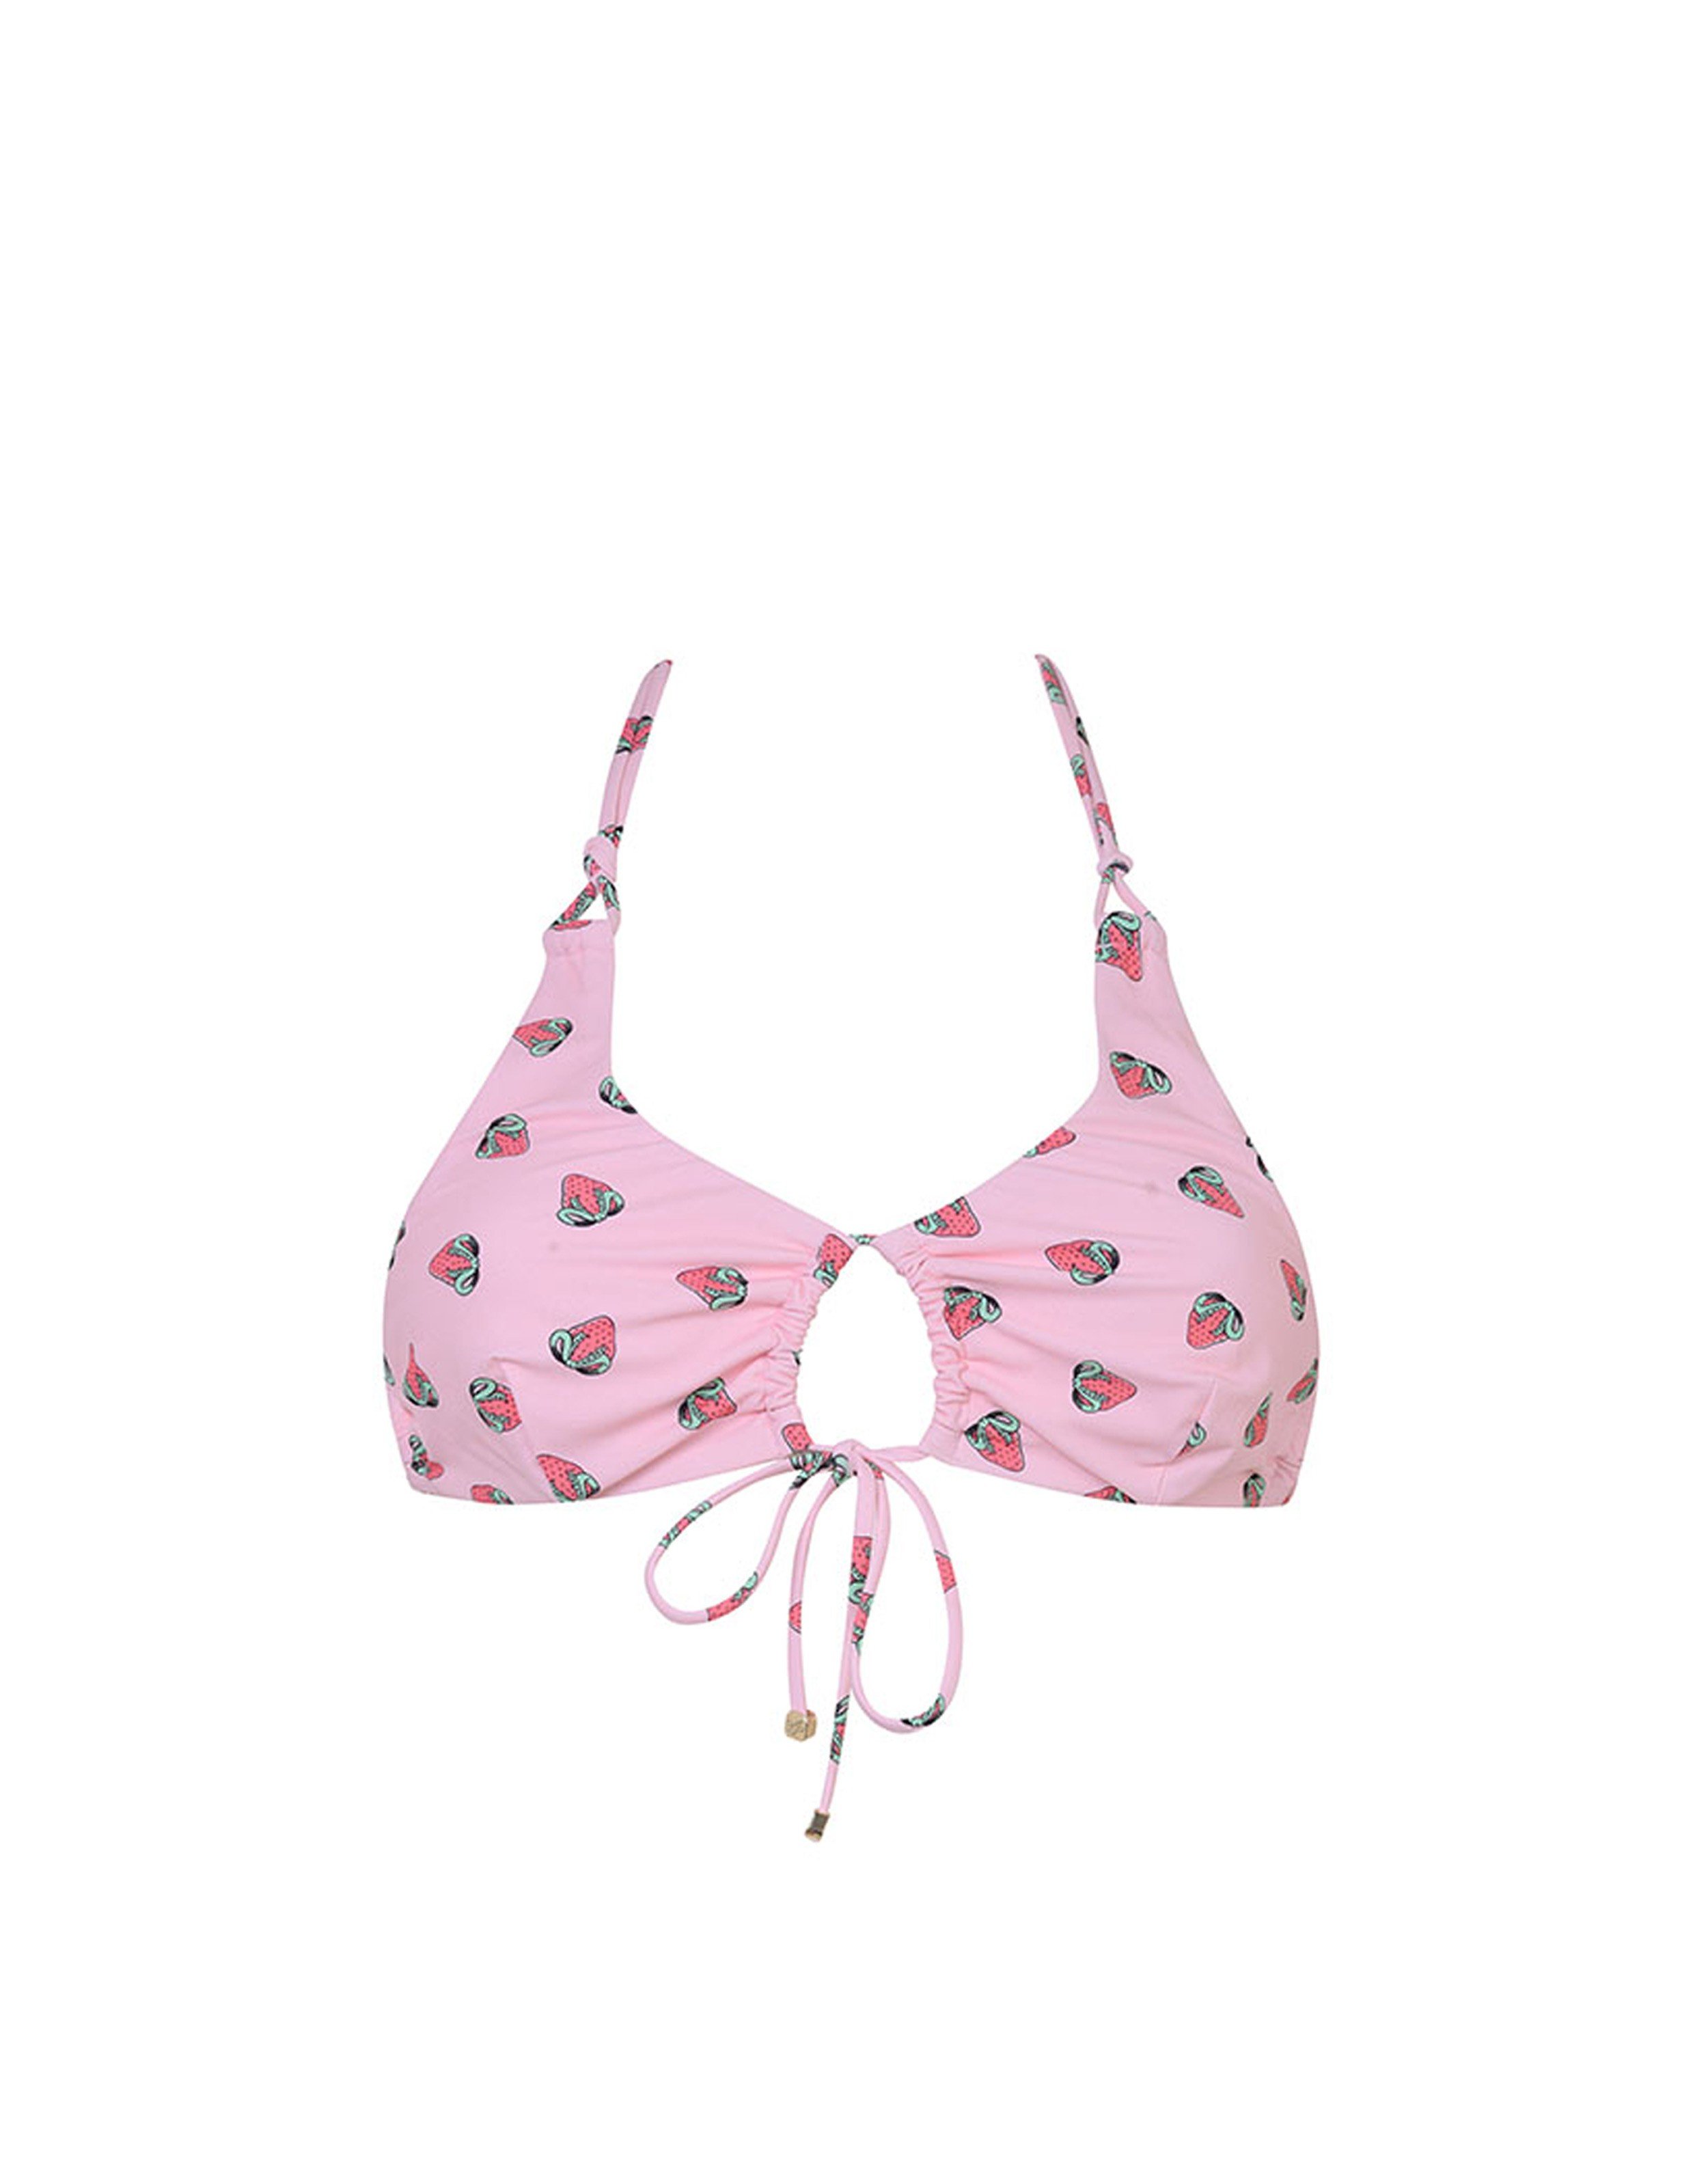 Fraise Bikini Top in Pink | Agent Provocateur